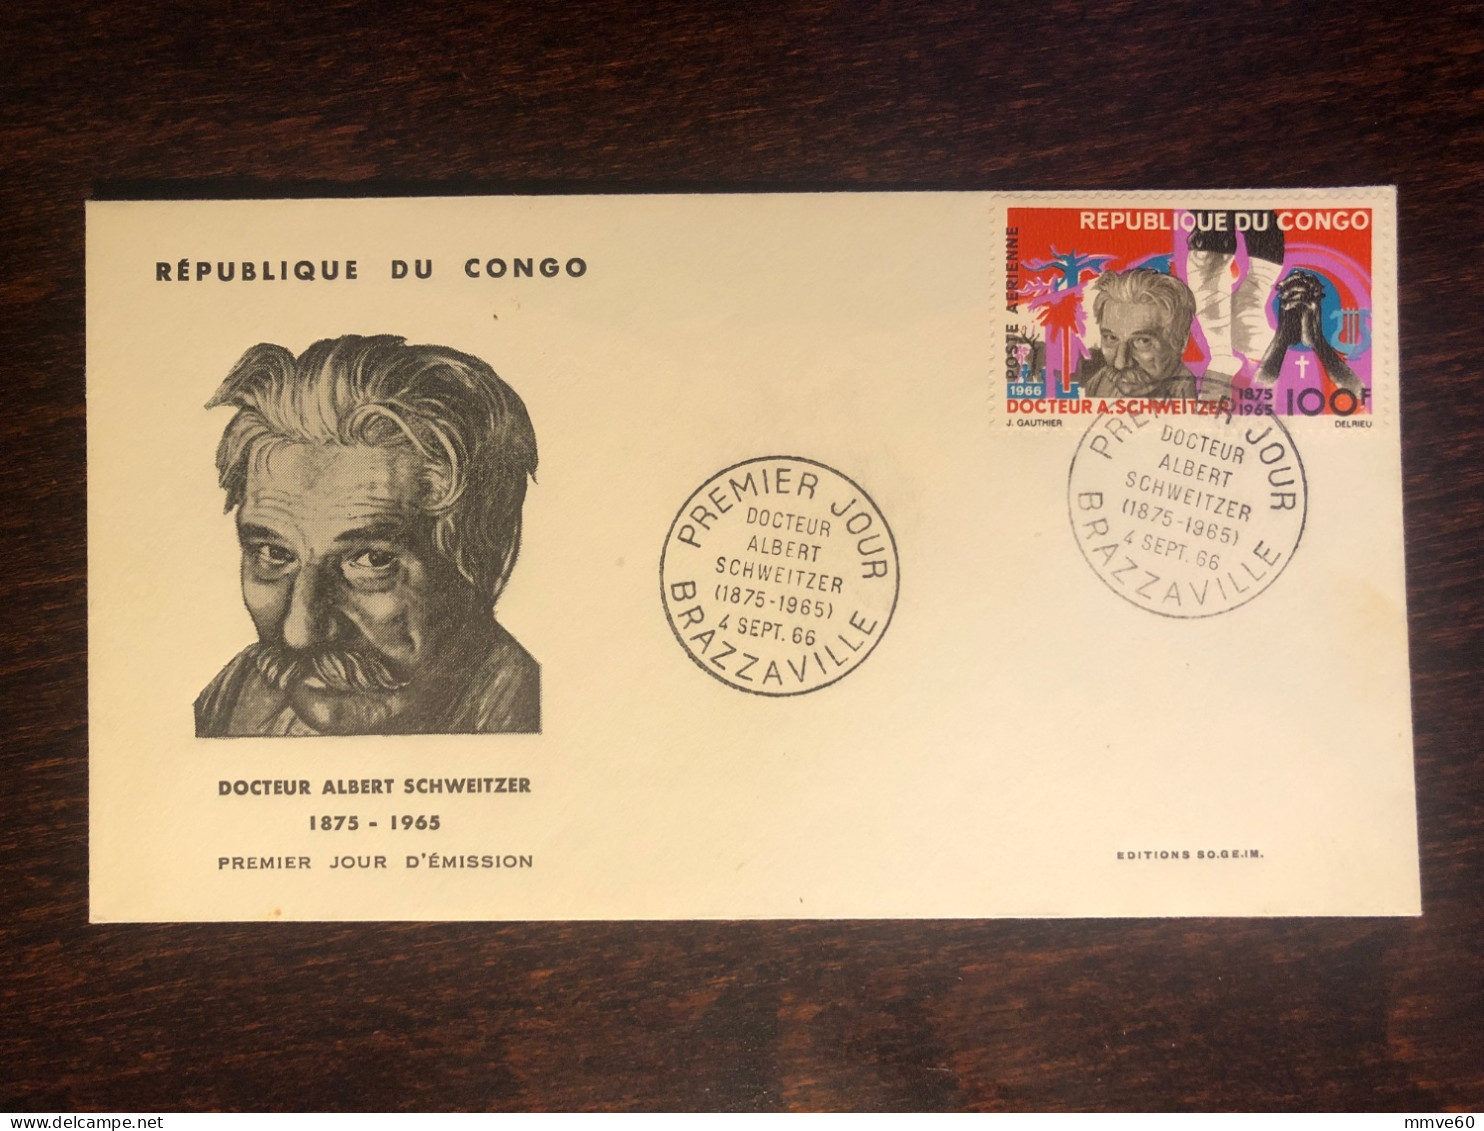 CONGO FDC COVER 1966 YEAR SCHWEITZER HEALTH MEDICINE STAMPS - FDC